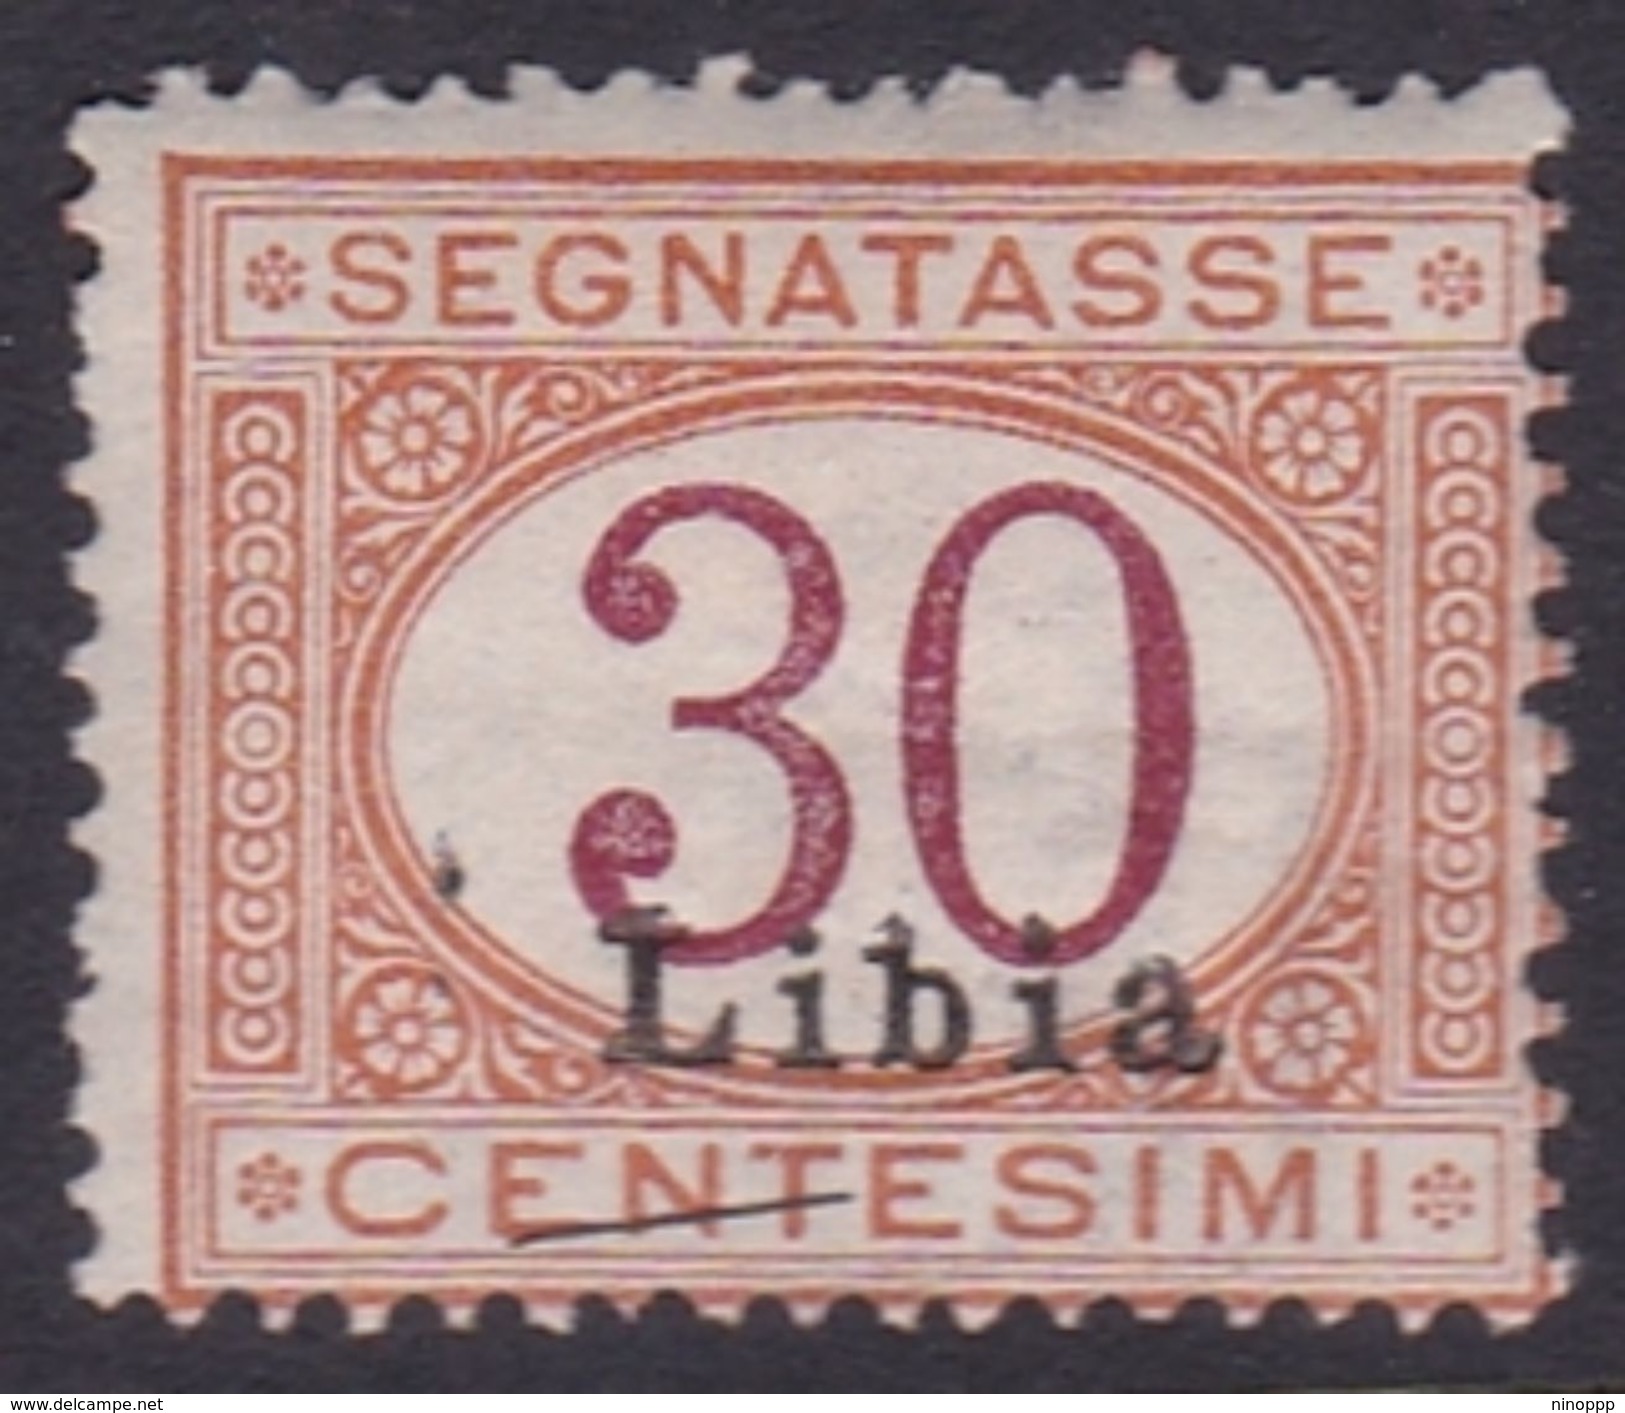 Italy-Colonies And Territories-Libya PD 4 1915 Postage Due,30c Orange And Carmine,mint Hinged - Libya